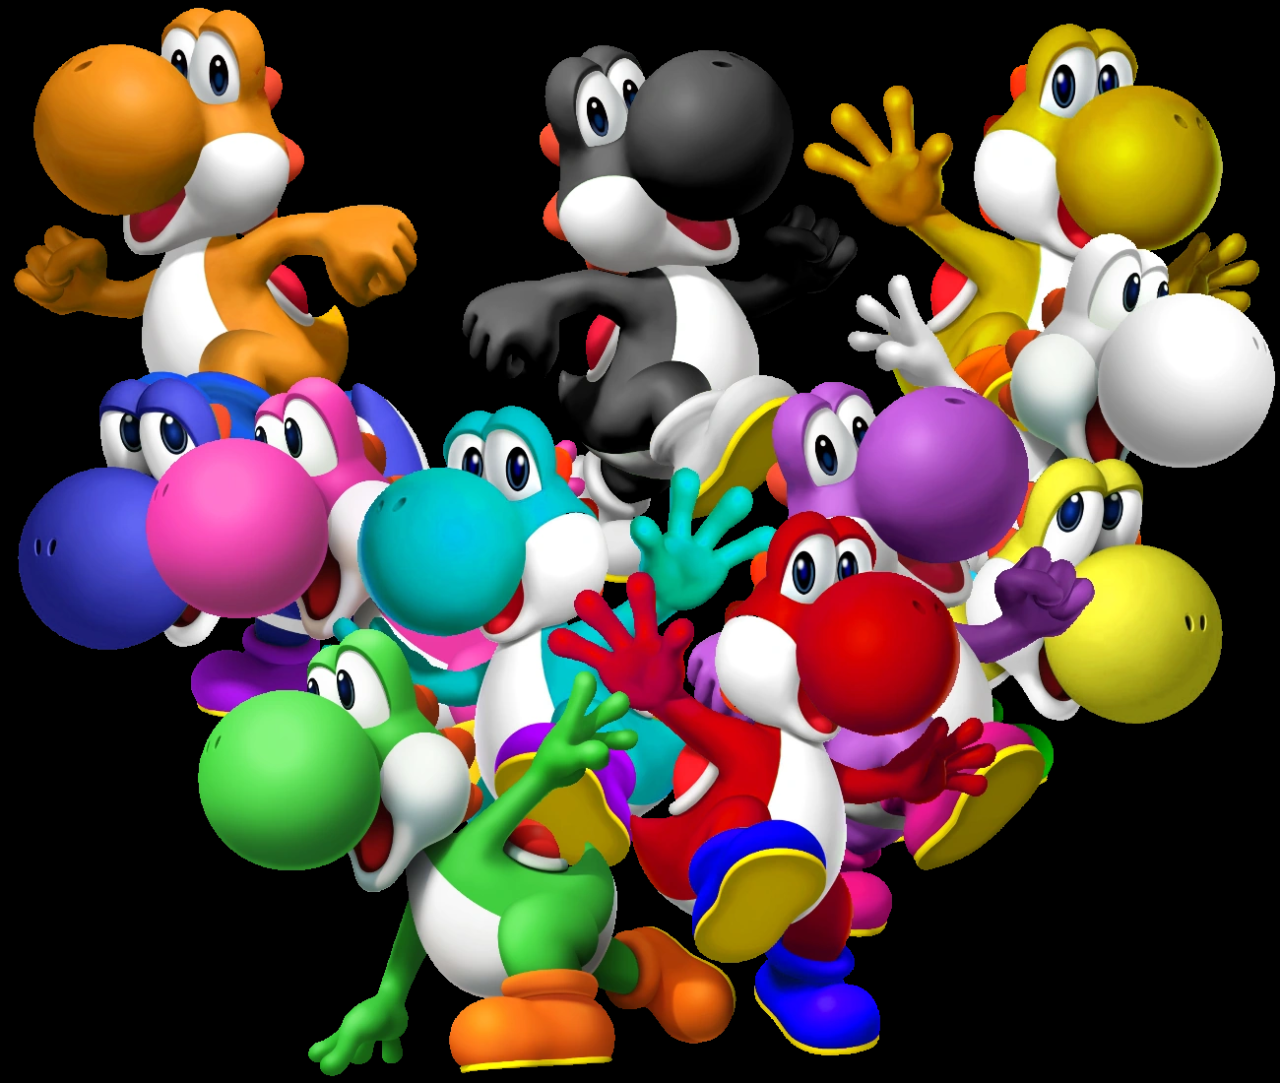 All the colors of yoshi